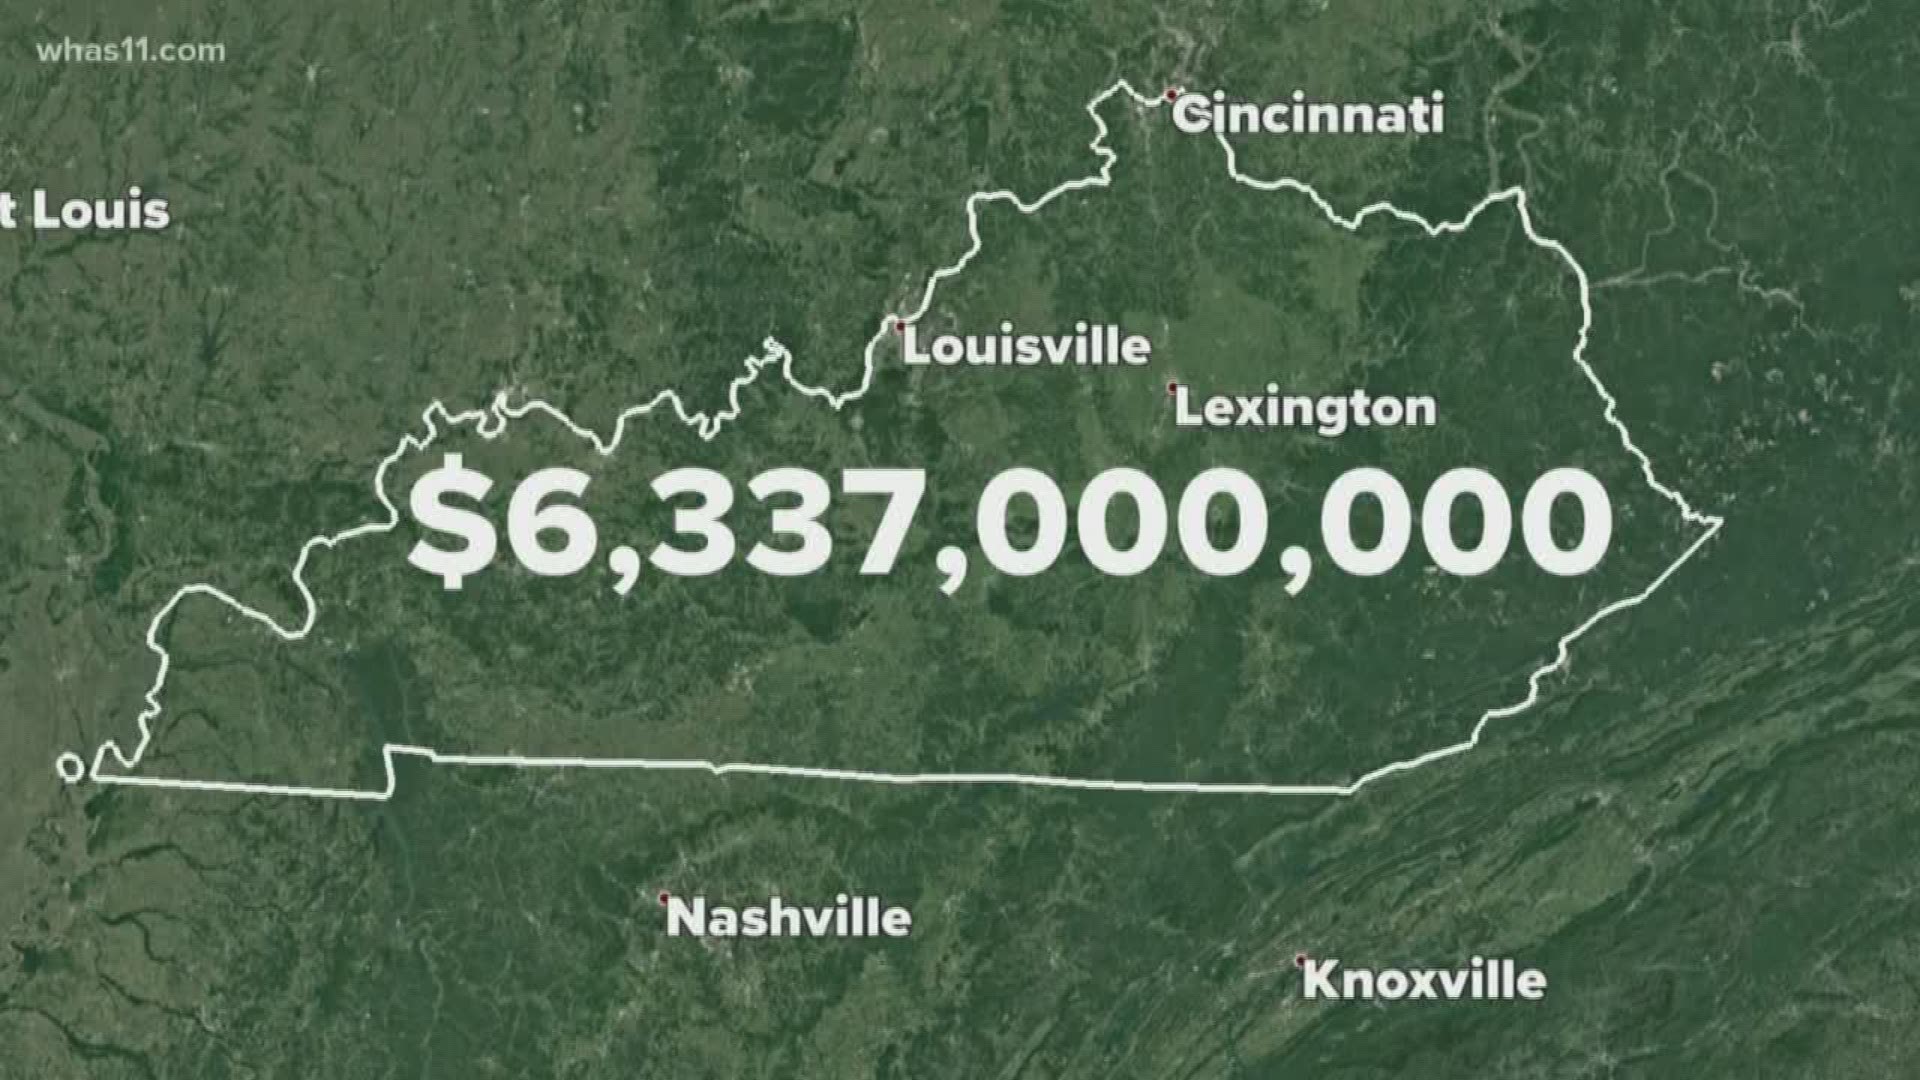 In 2019, US Census Bureau data shows Kentucky imported more than 6,337-million dollars worth of goods from China.